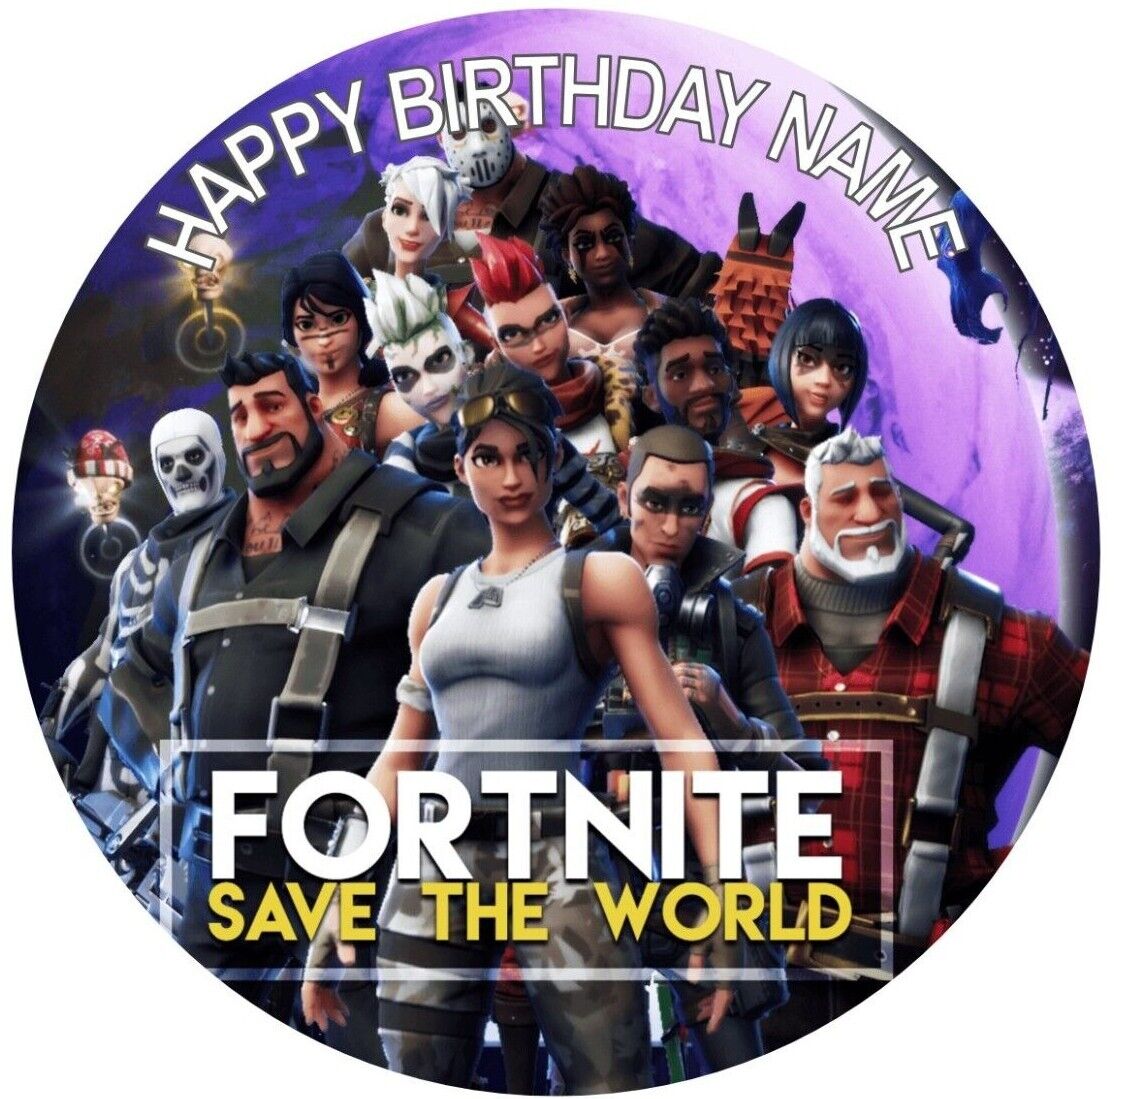 Fortnite PERSONALISED PRINTED EDIBLE BIRTHDAY CAKE TOPPER DECORATION